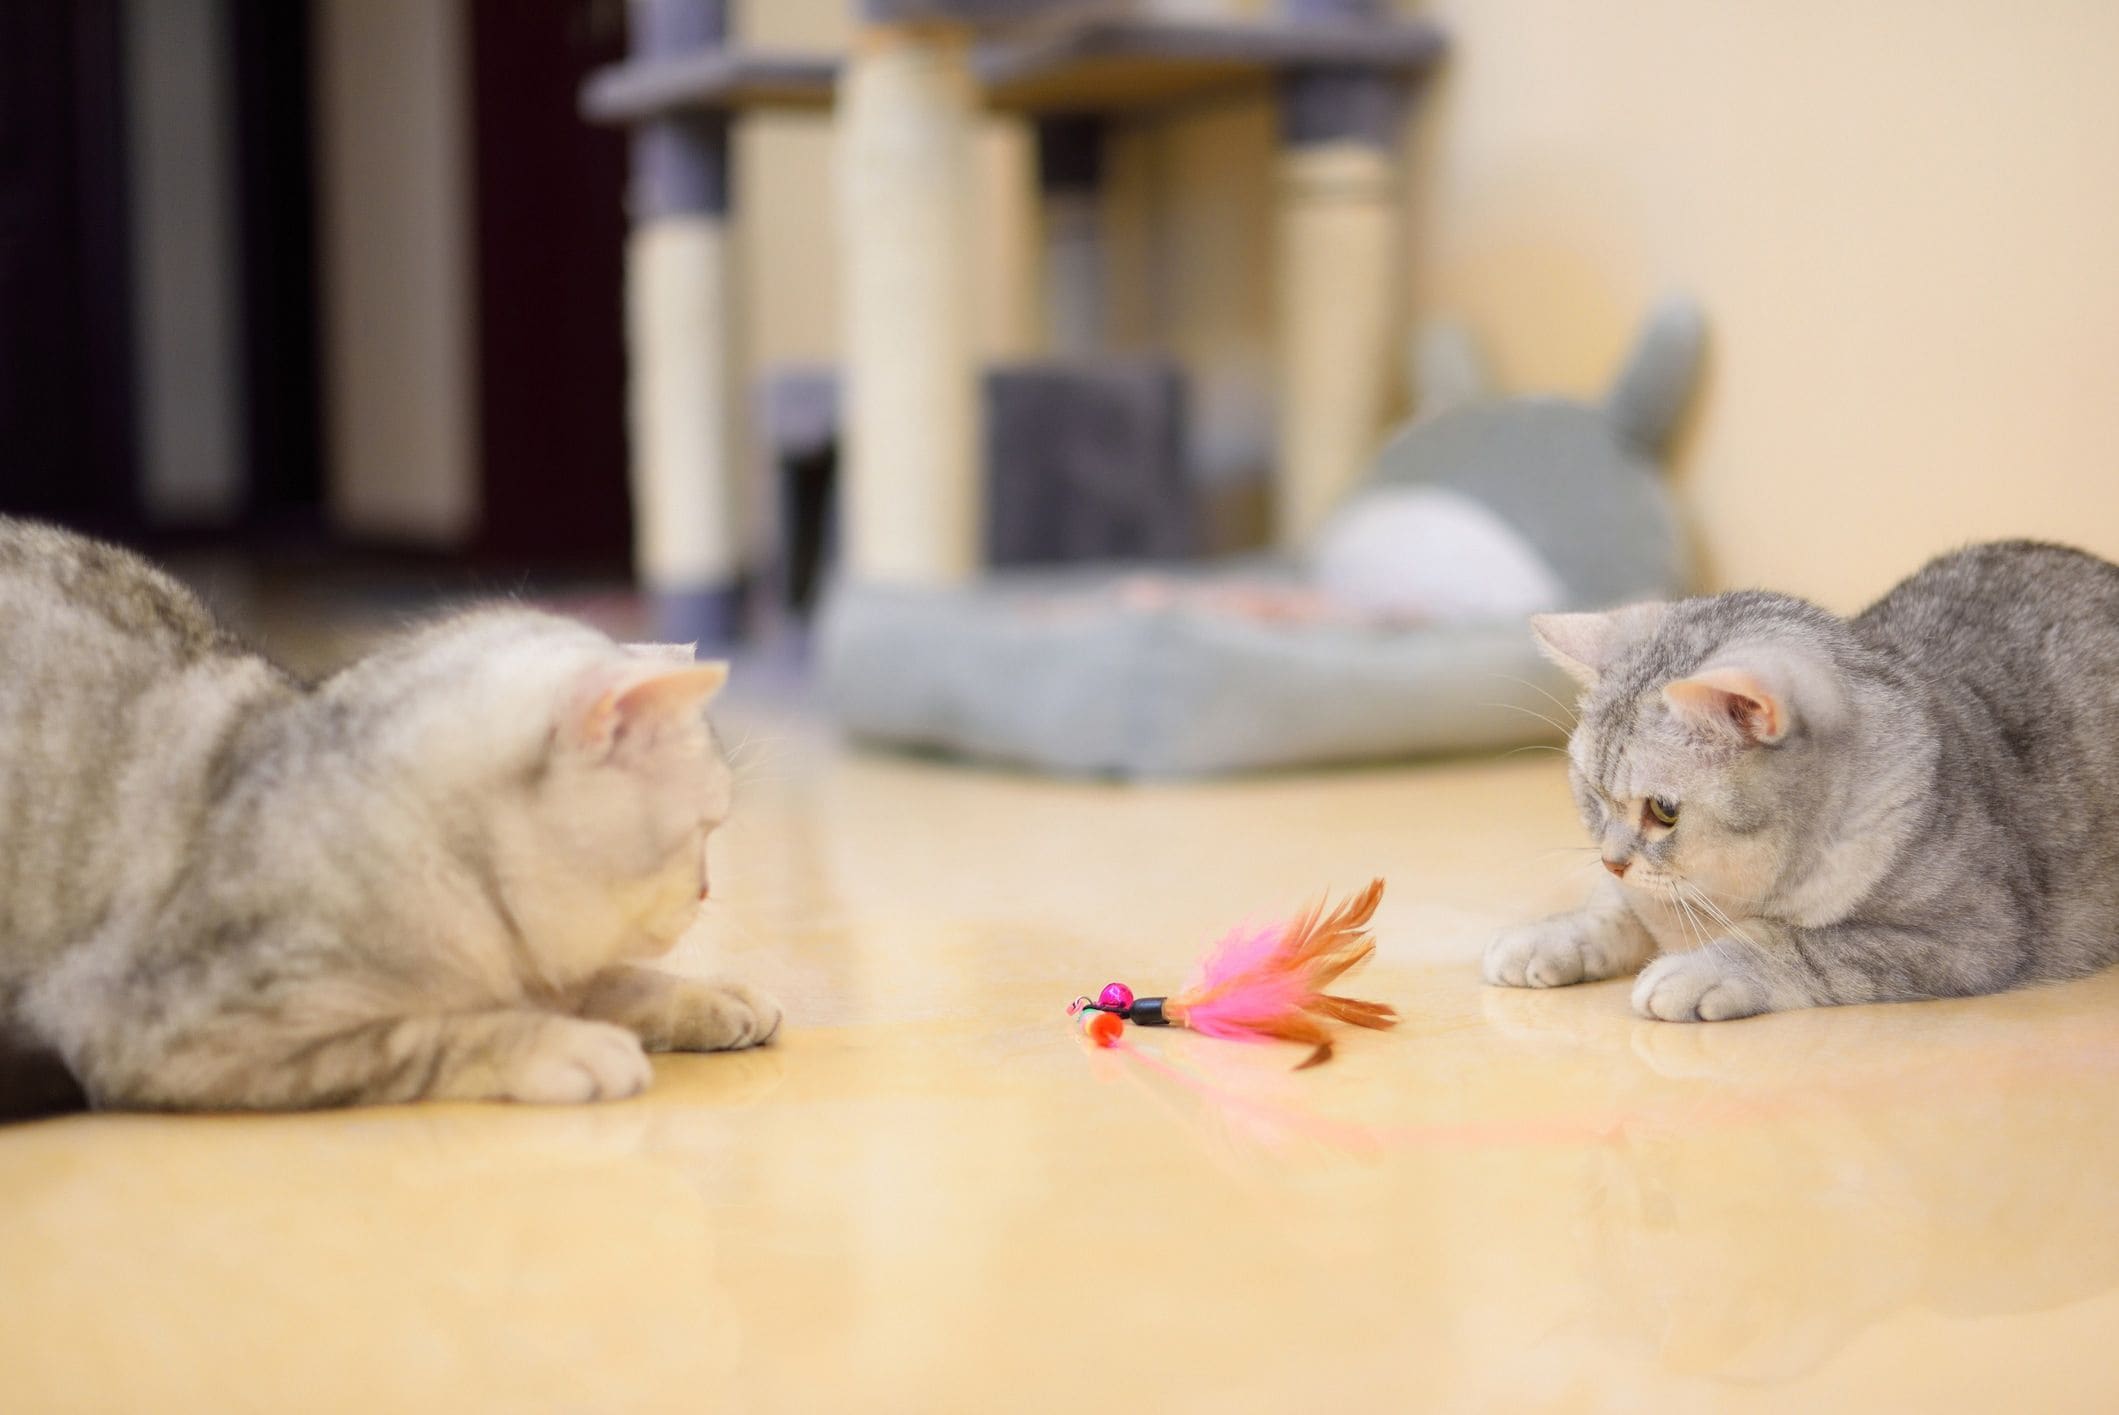 How to stop cat bullying at home, according to experts